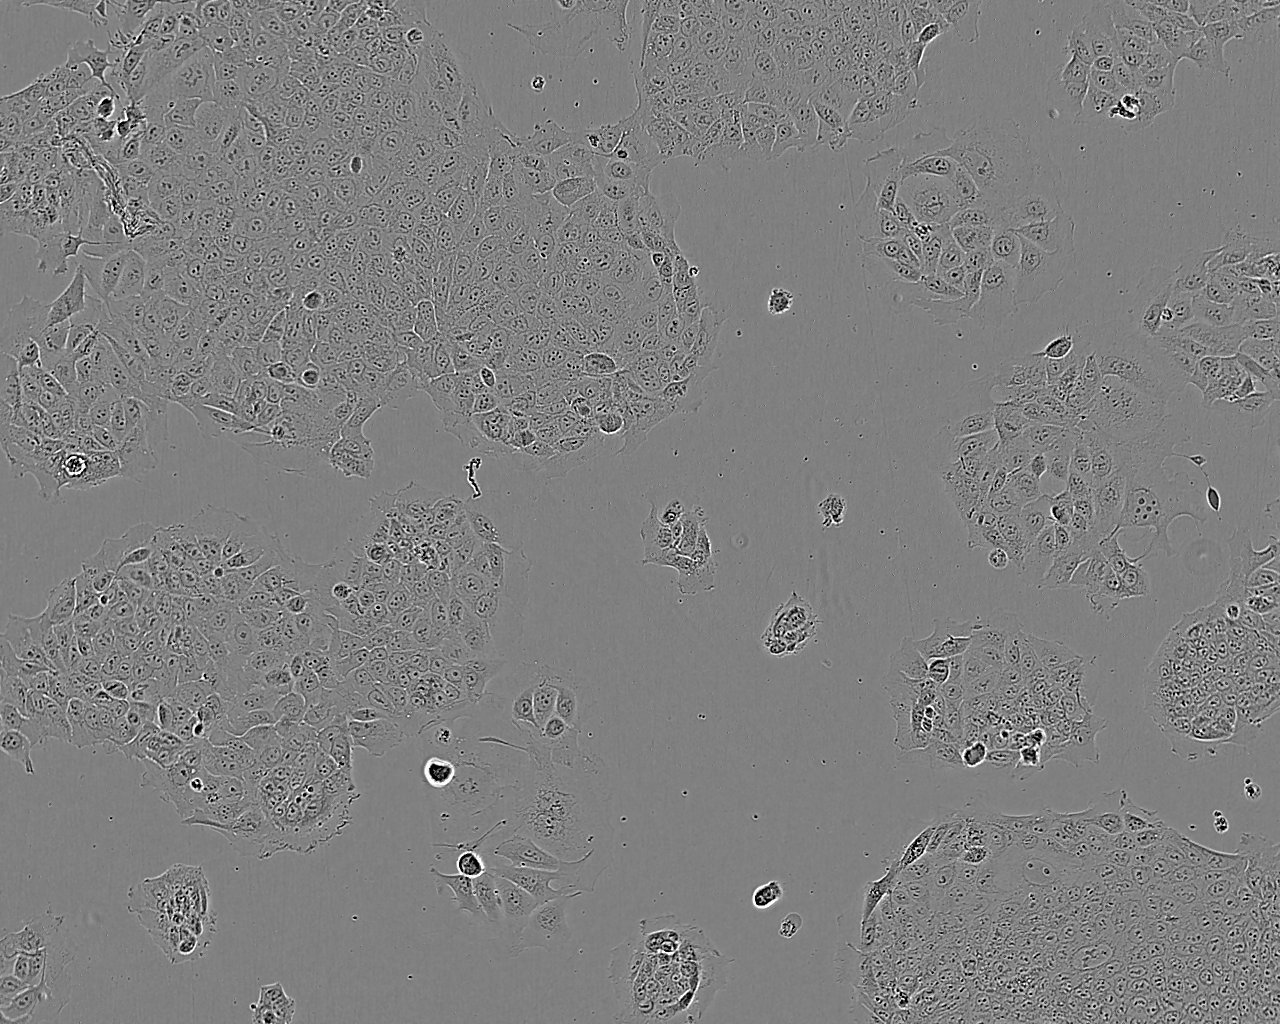 SW1271 cell line人肺腺癌细胞系,SW1271 cell line